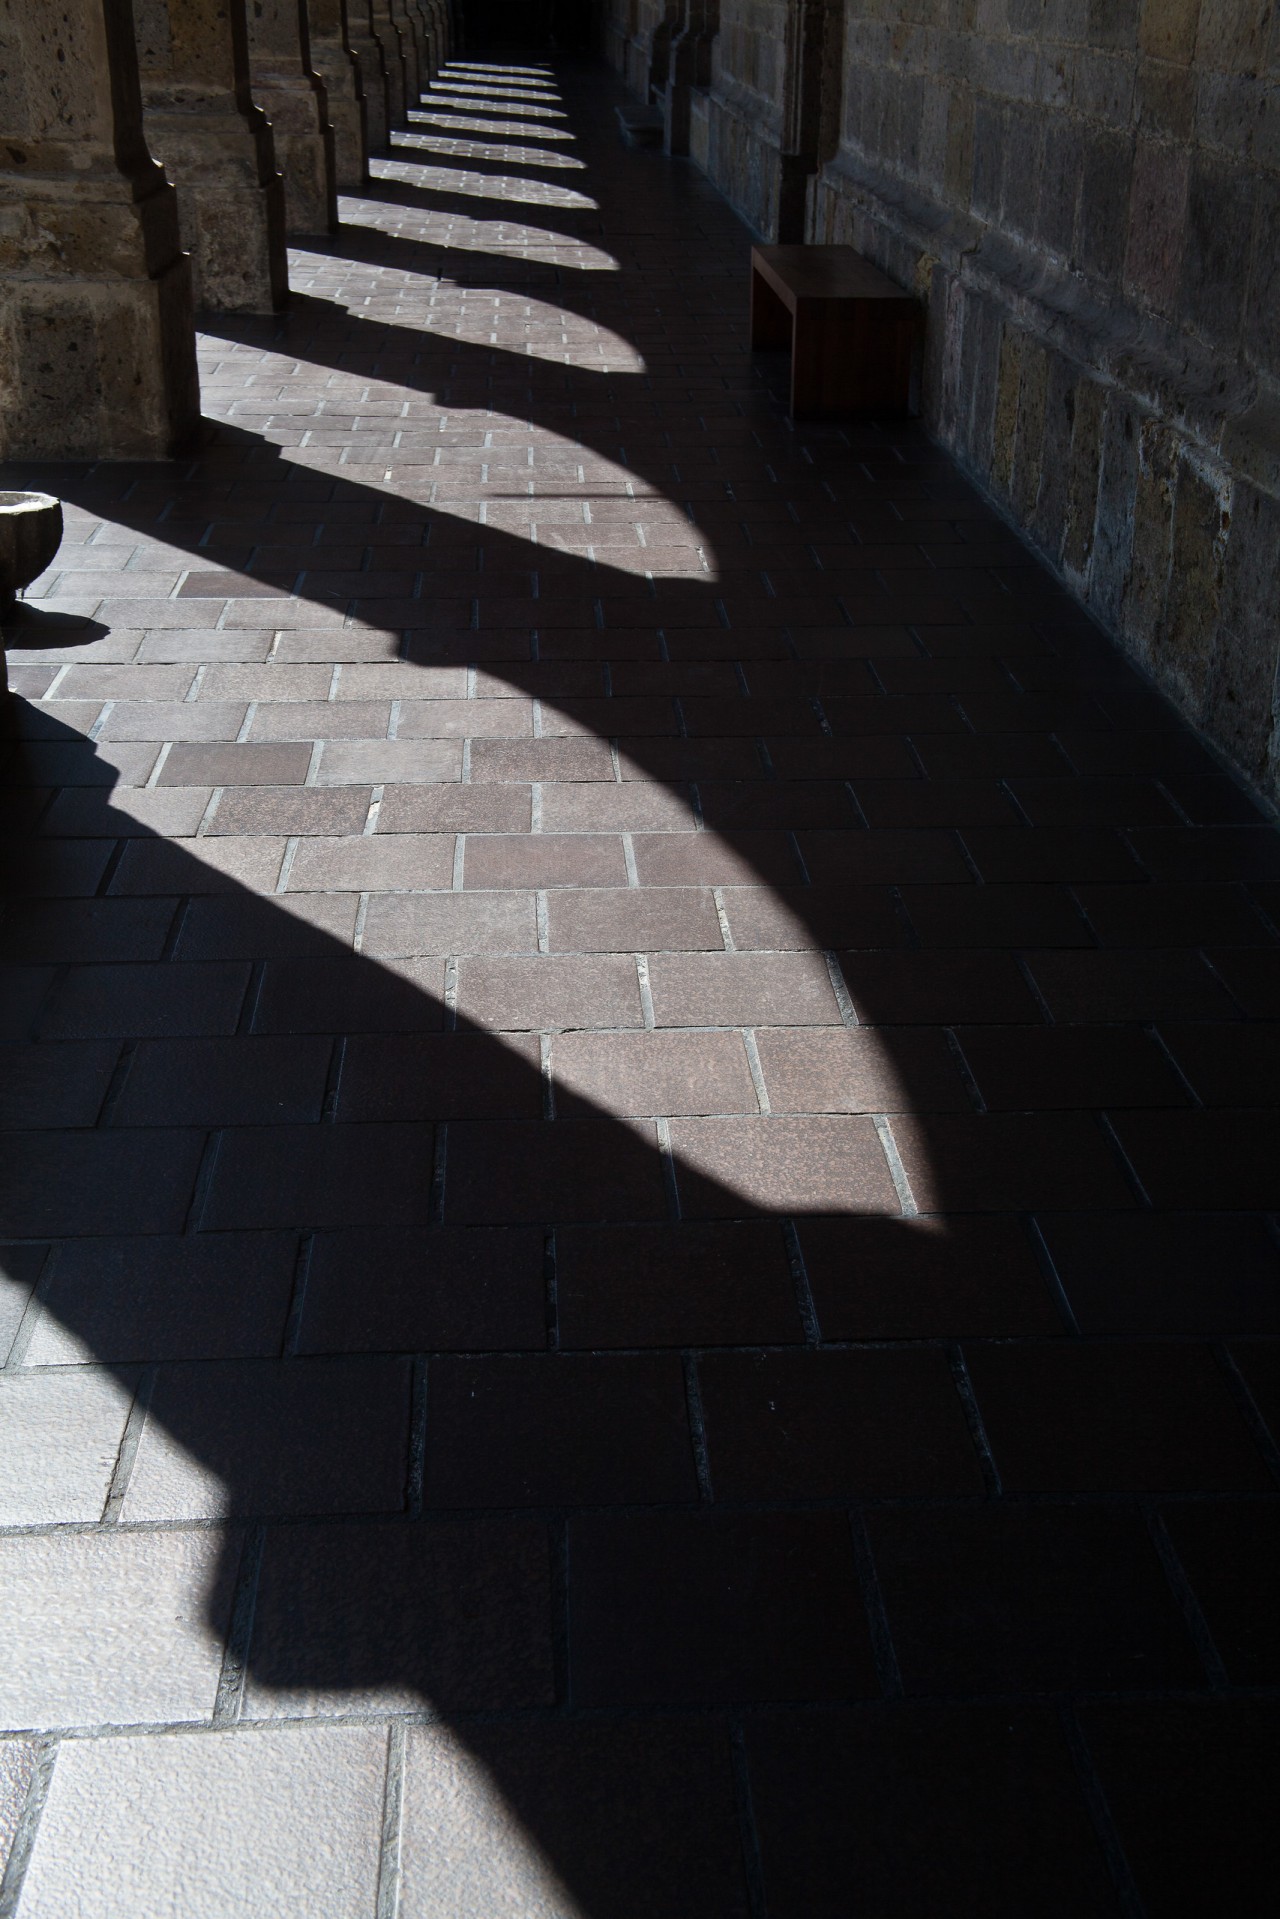 Cloisters and Shadows